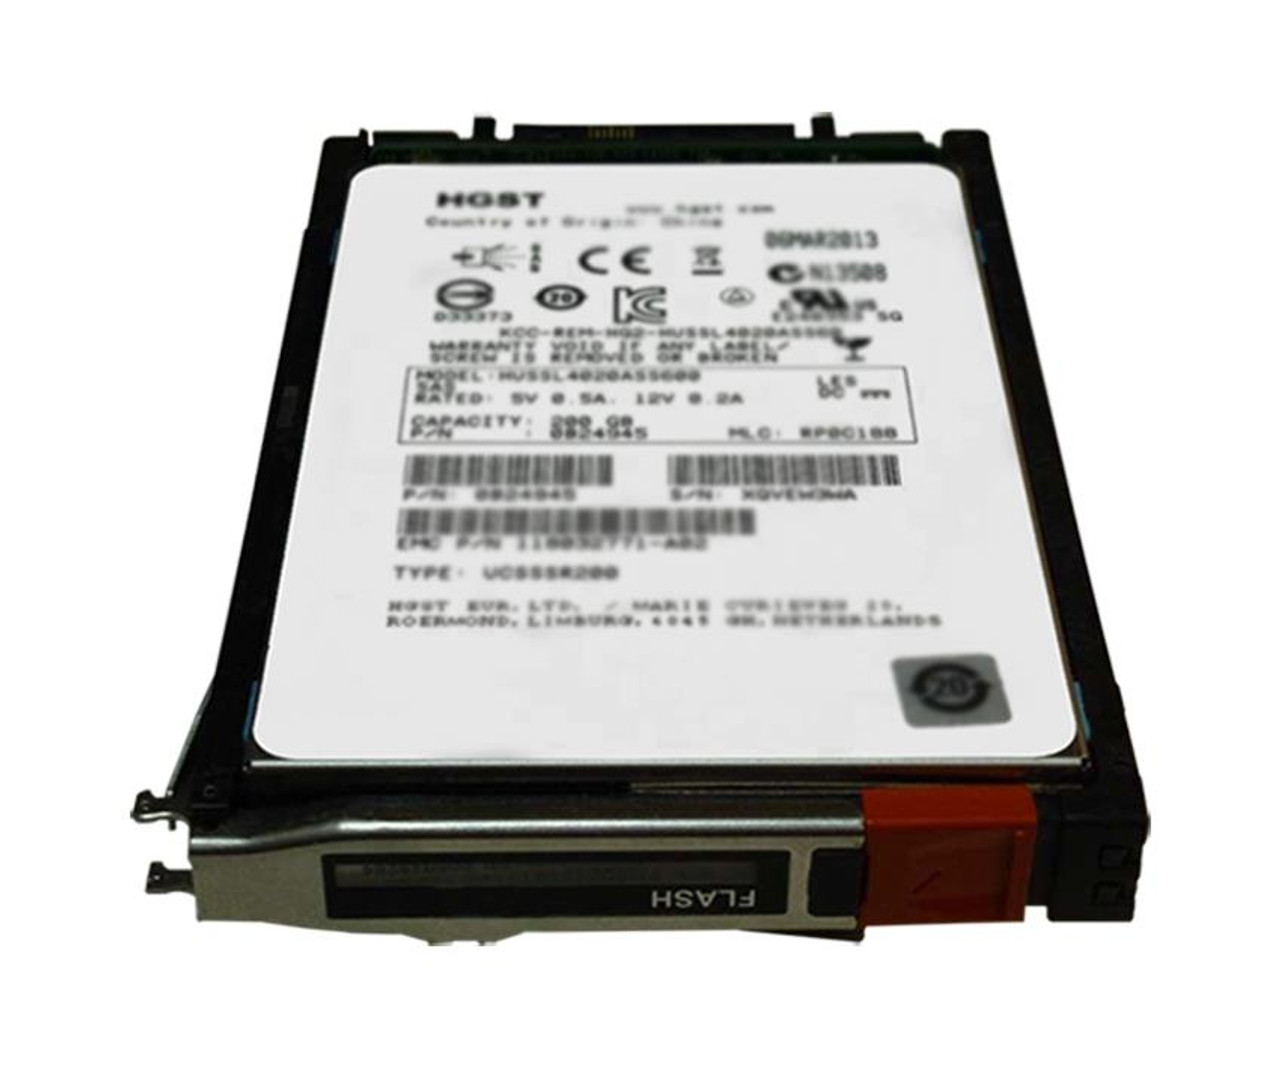 005051723 EMC 1600GB SAS 6Gbps EFD 2.5-inch Internal Solid State Drive (SSD) with Tray for VNX5200 5400 5600 5800 7600 8000 Storage Systems